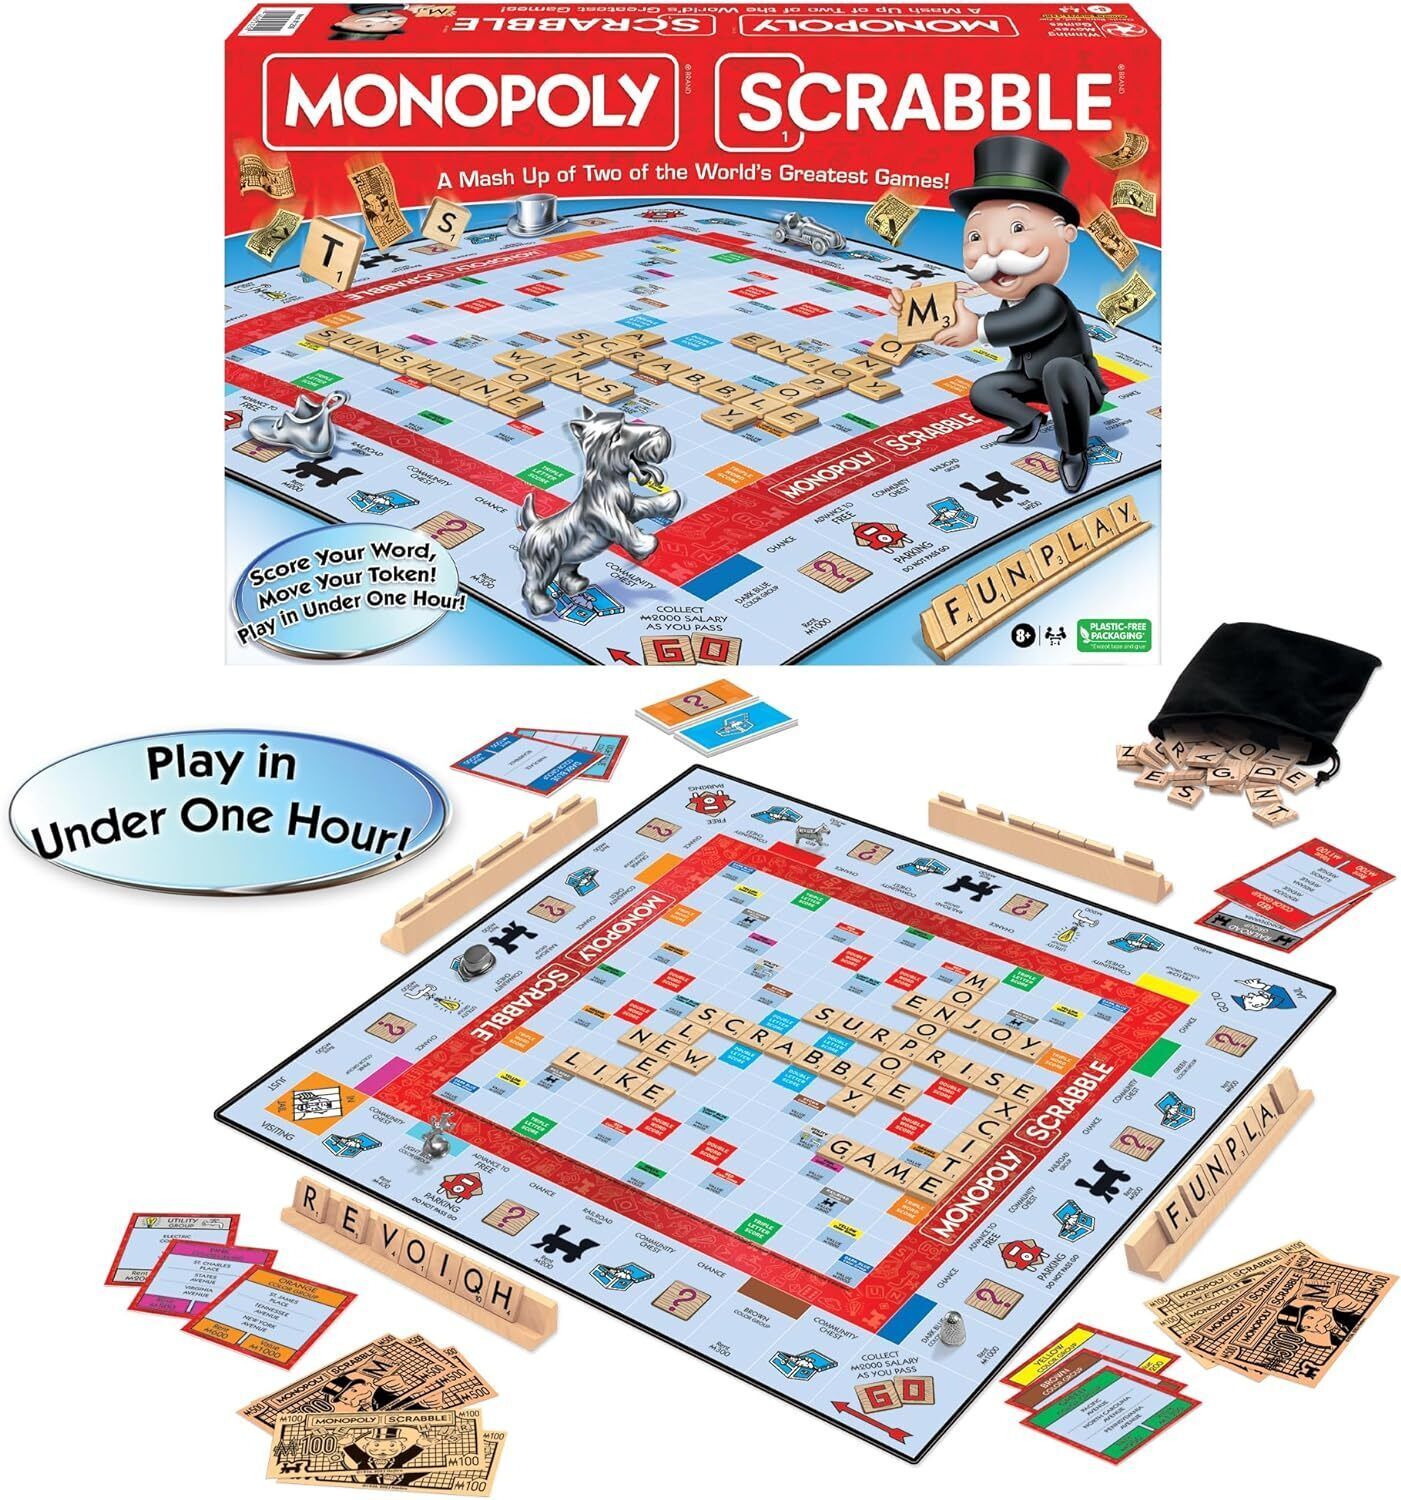 Monopoly Scrabble Game Play in UNDER ONE HOUR Score Your Scrabble Word Move Your - $71.70